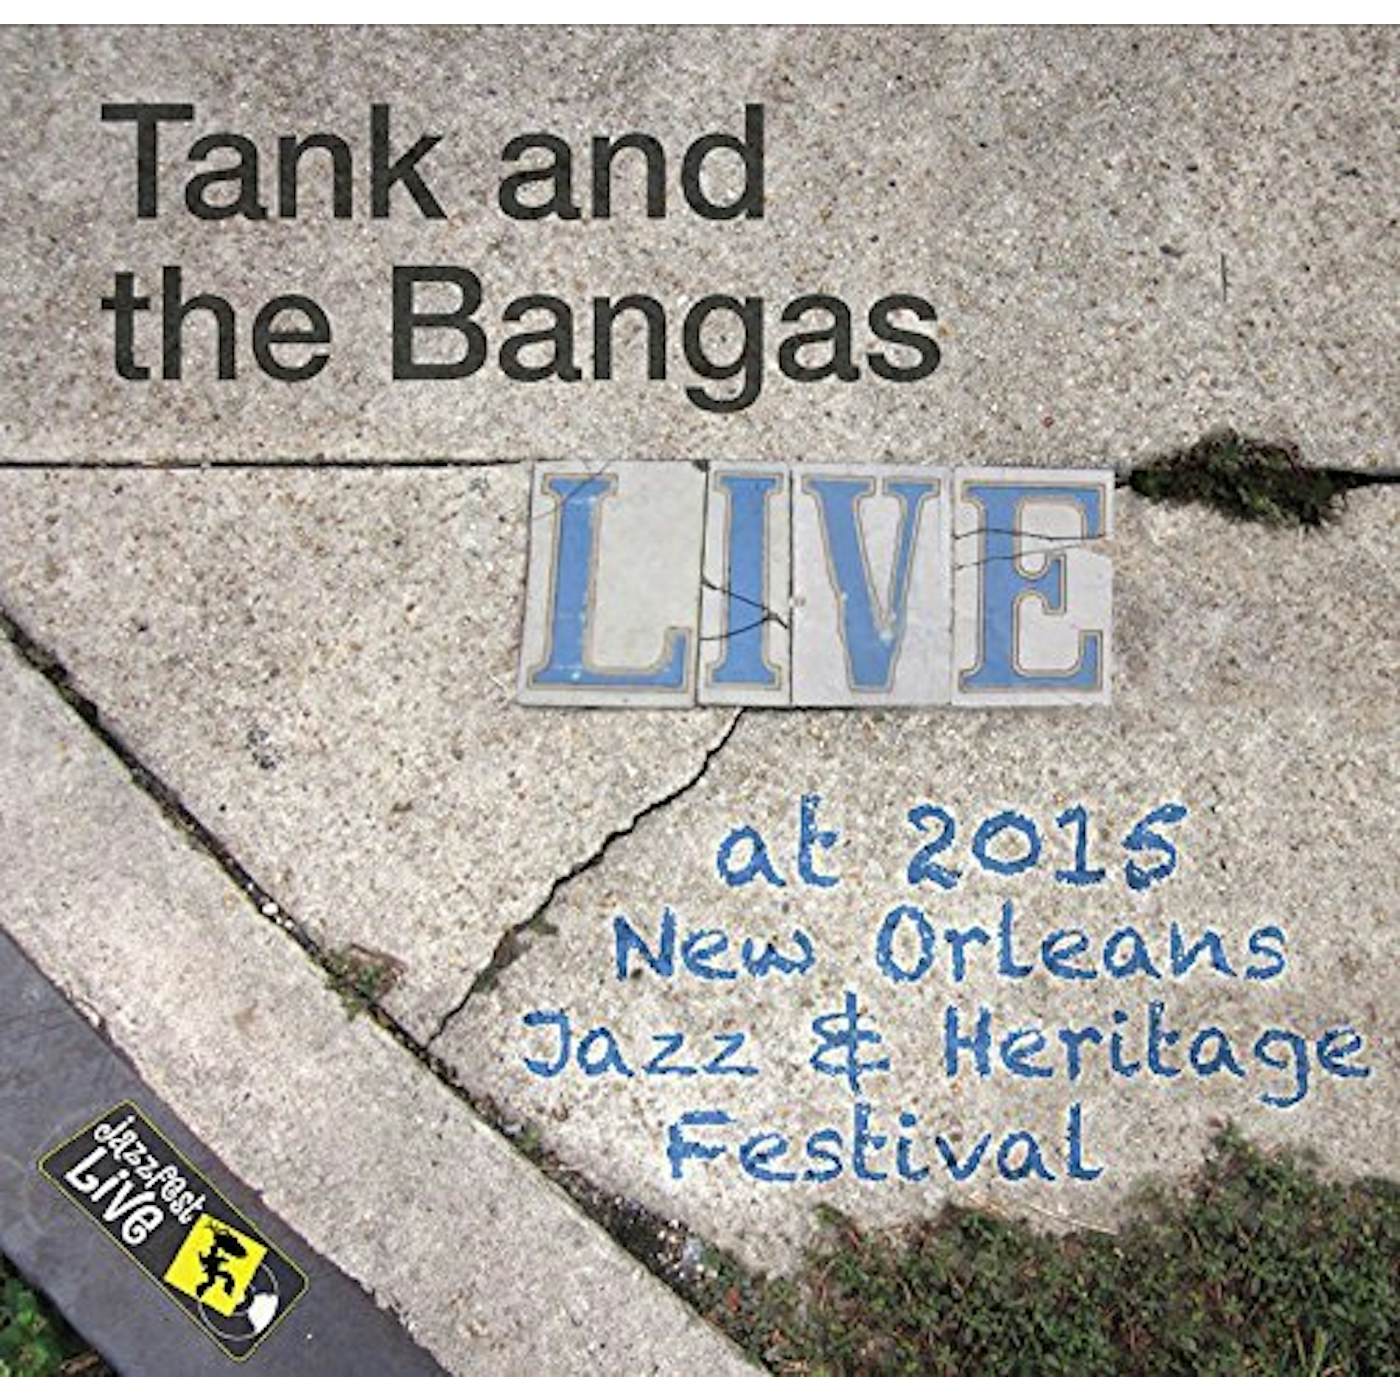 Tank and The Bangas JAZZFEST 2015 CD